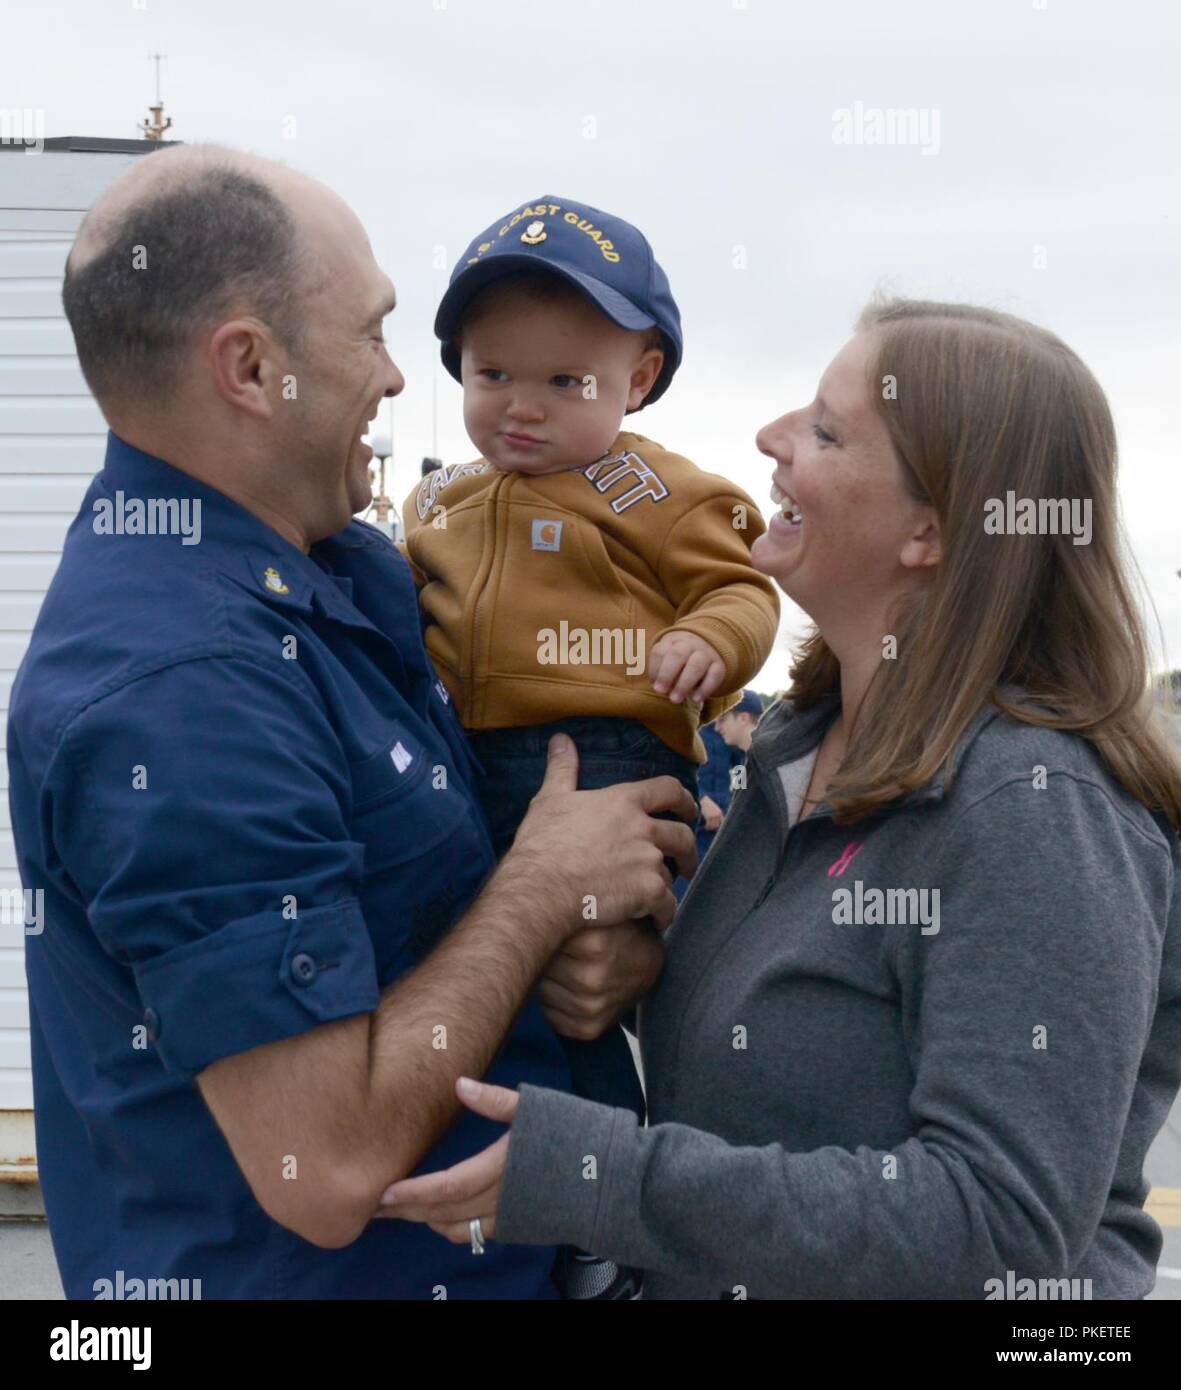 Chief Petty Officer James Maida, a boatswains mate aboard the Coast Guard Cutter Alex Haley (WMEC 39), greets his family after the cutter moored at its homeport in Kodiak, Alaska, August 1, 2018. The crew members of the Alex Haley returned from a 90-day deployment patrolling more than 16,000 miles throughout the Pacific Ocean. U.S. Coast Guard Stock Photo